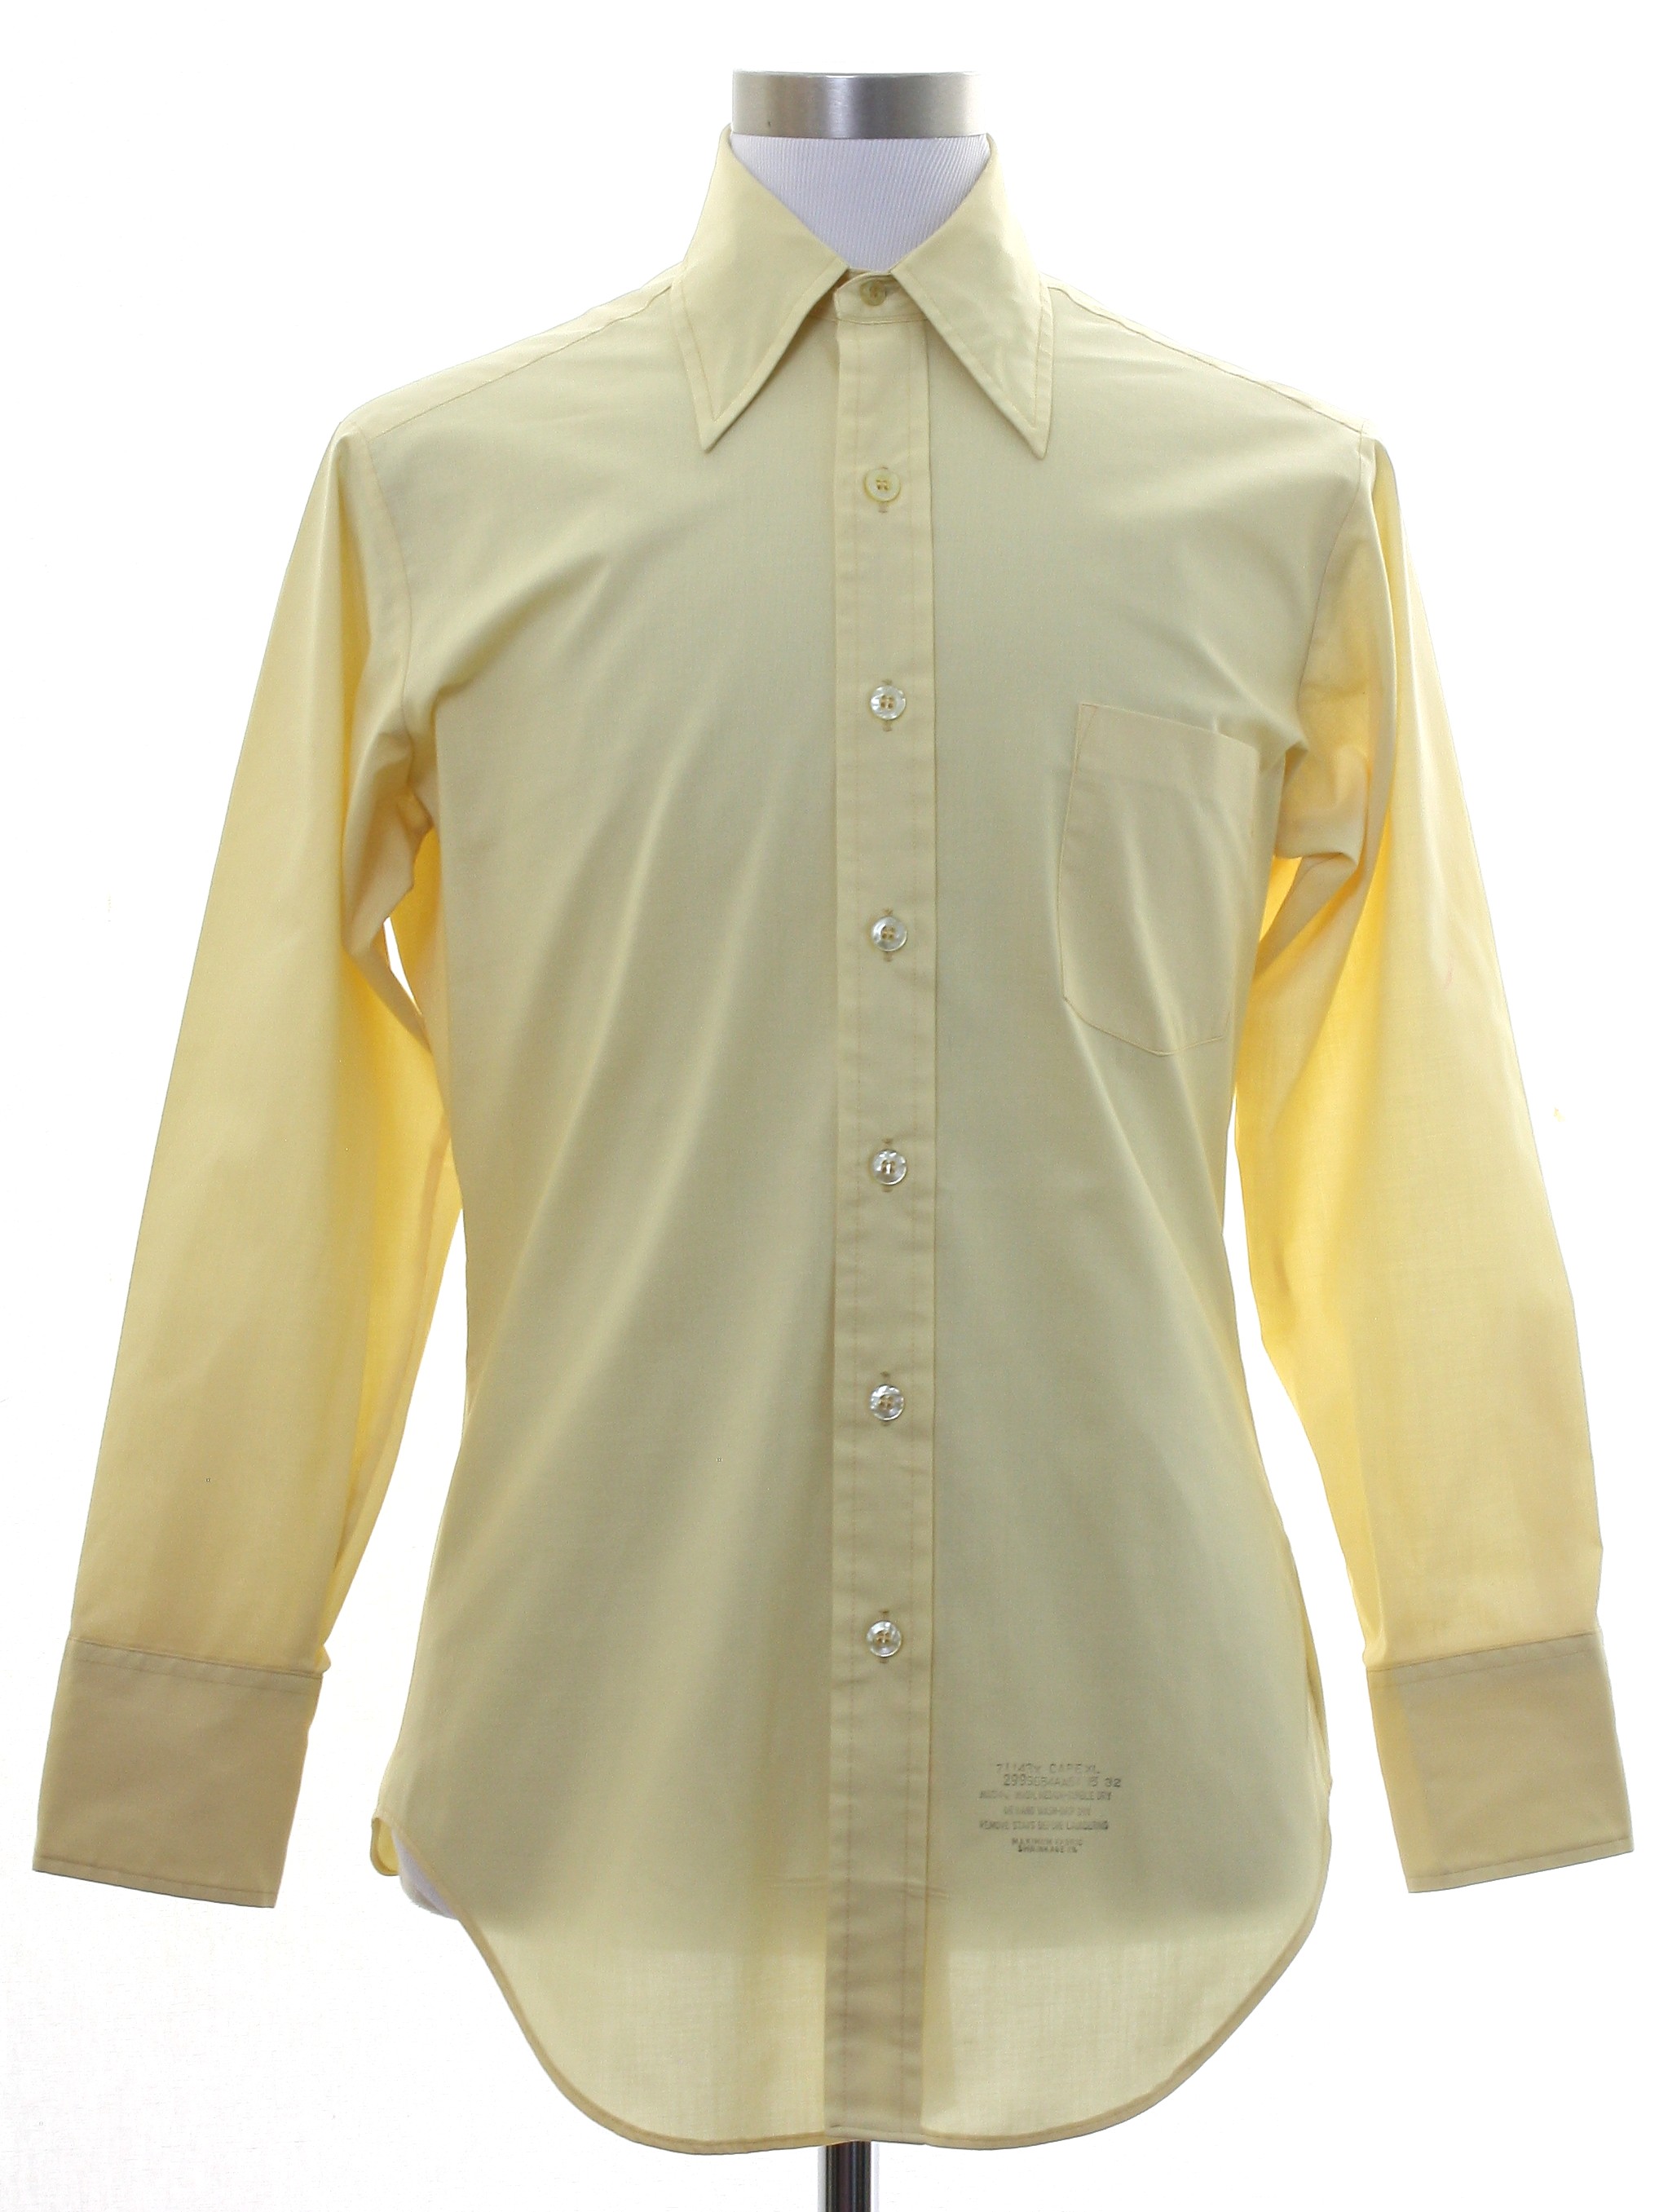 Seventies Vintage Shirt: Early 70s -Sears- Mens butter yellow crisp ...